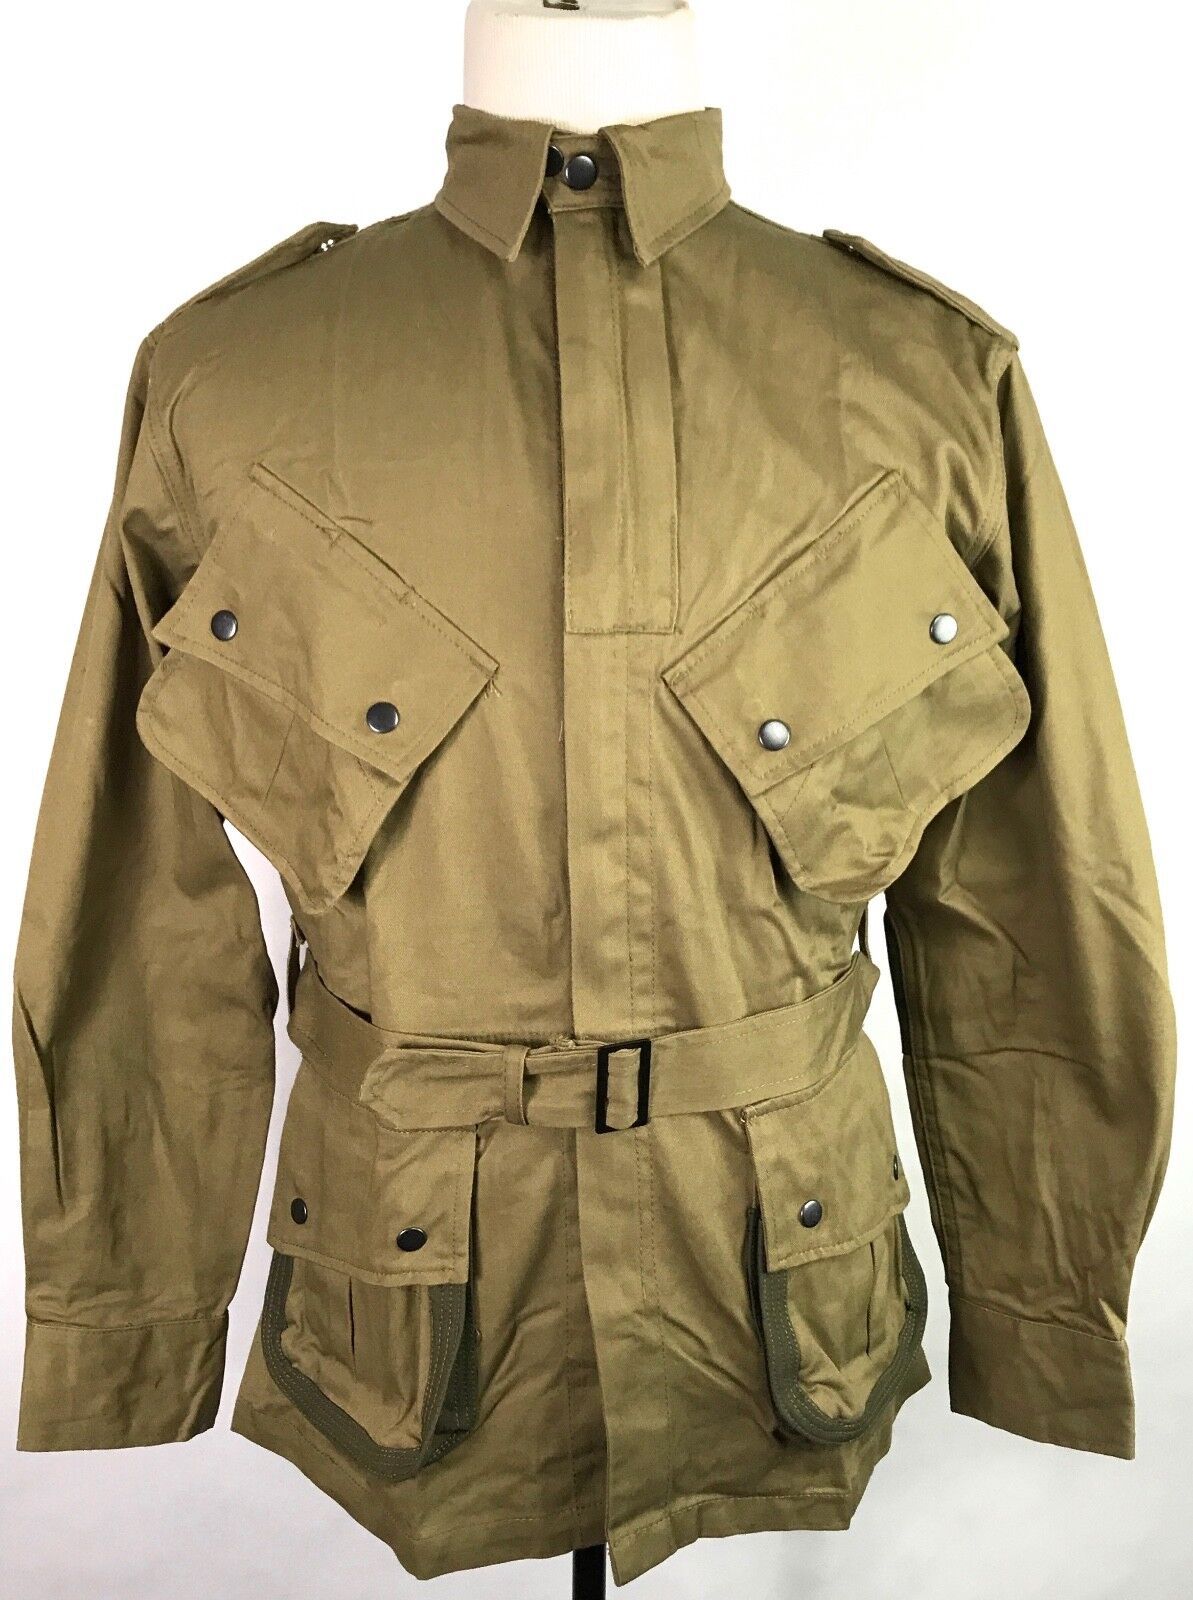  WWII US AIRBORNE PARATROOPER M1942 M42 REINFORCED JUMP JACKET- SMALL